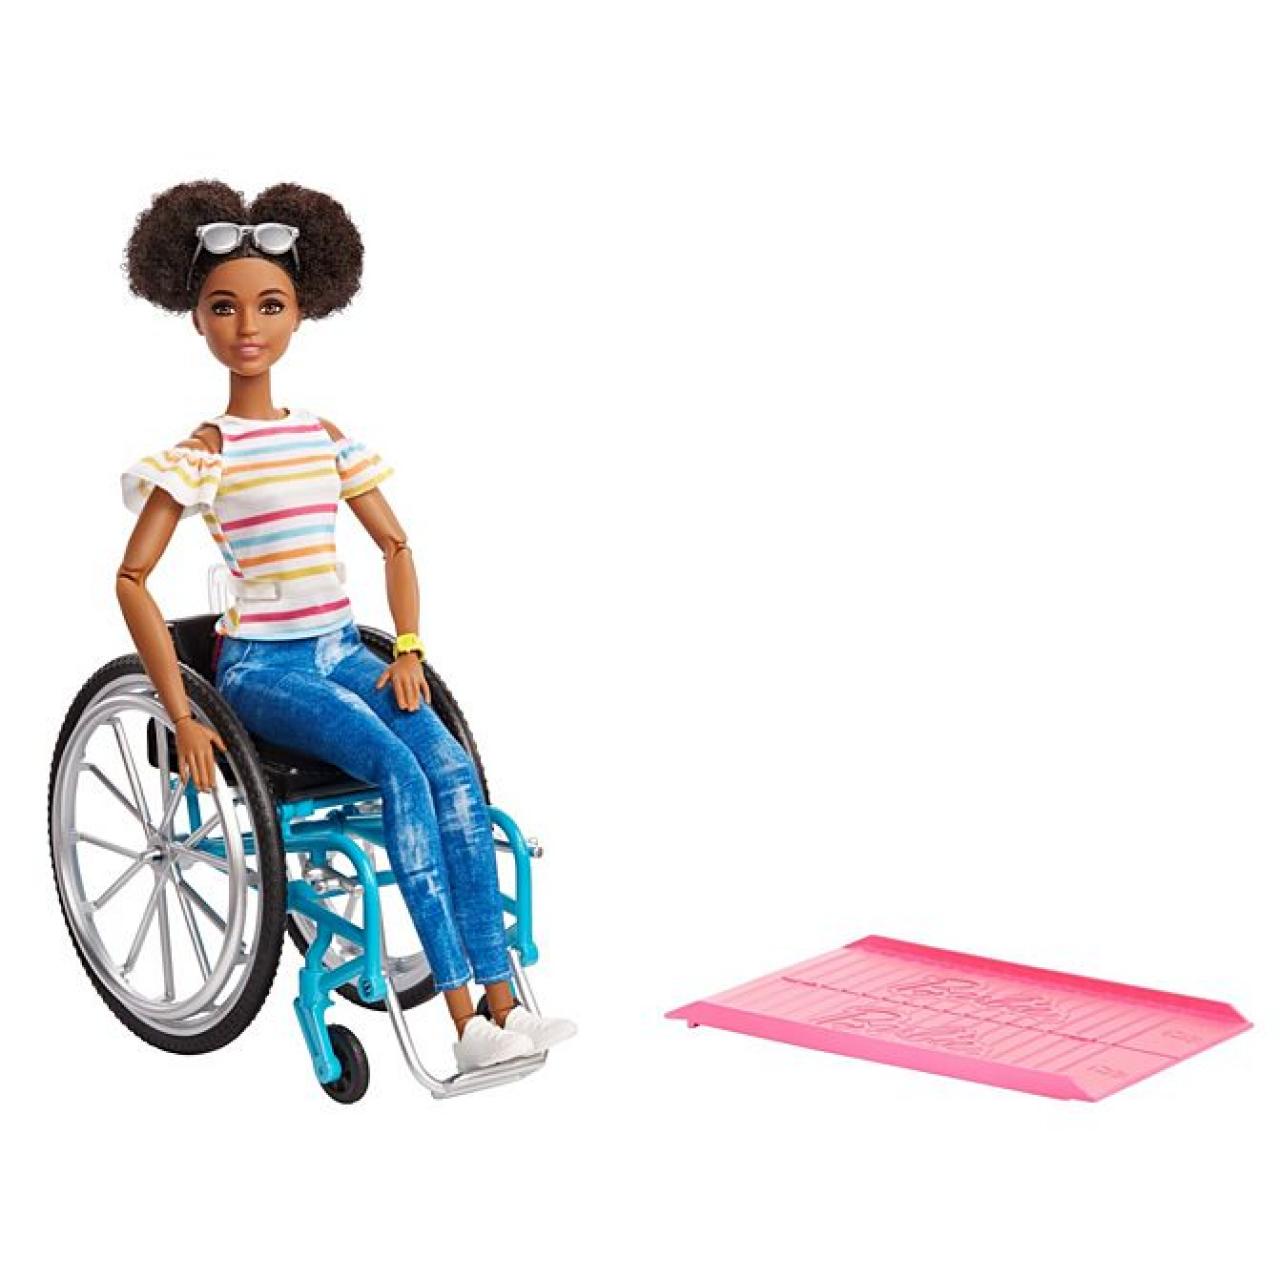 Toys that Promote Kindness, Diversity and Inclusion